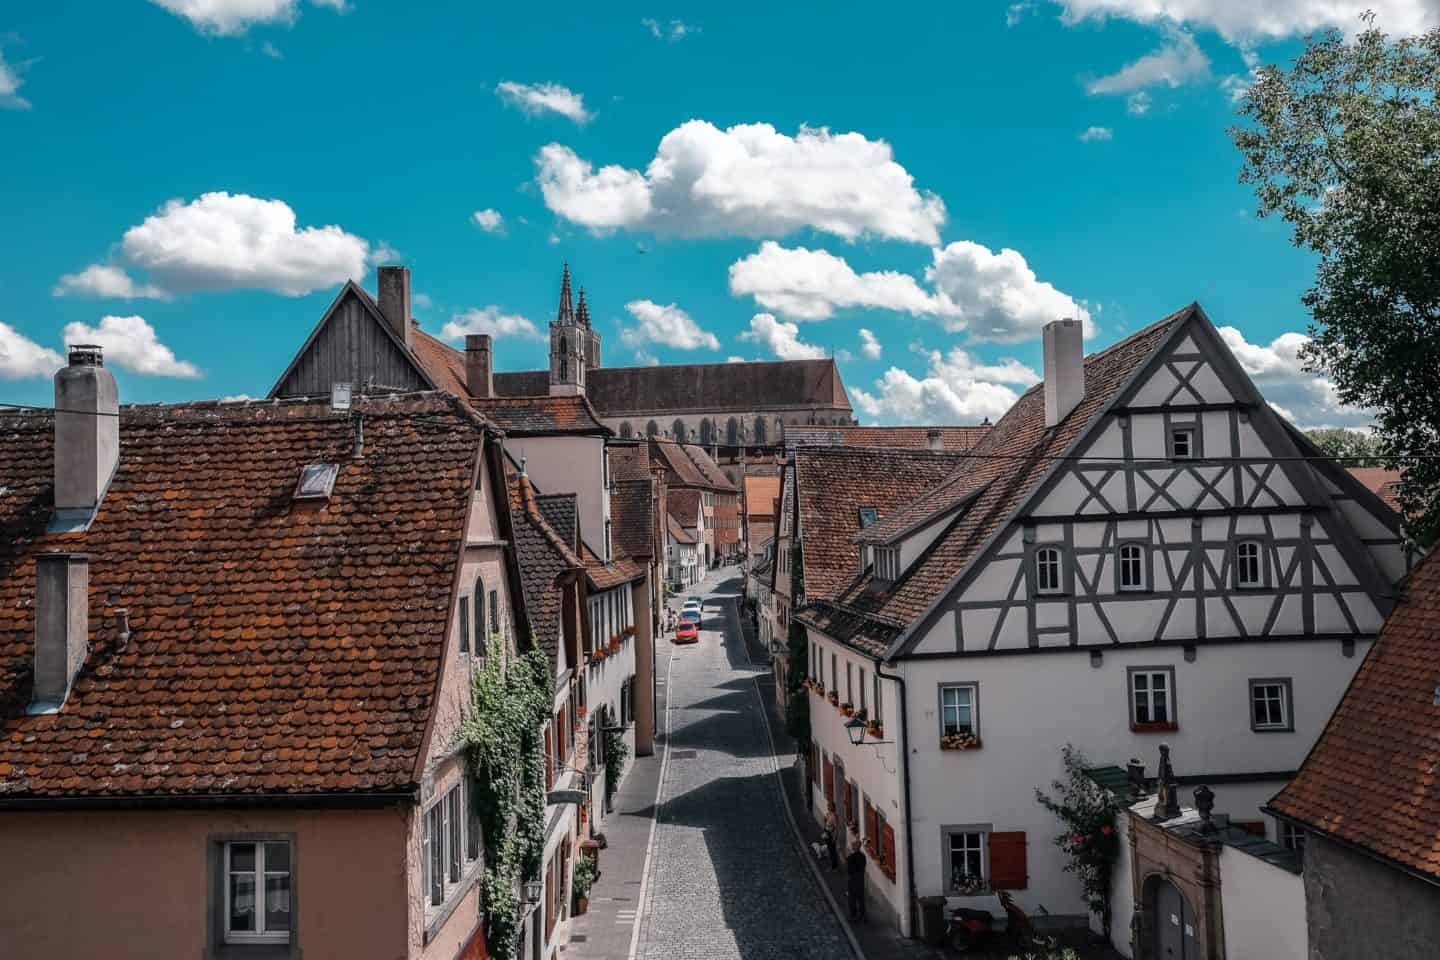 A picturesque view down a cobblestone street lined with traditional German houses in Rothenburg ob der Tauber